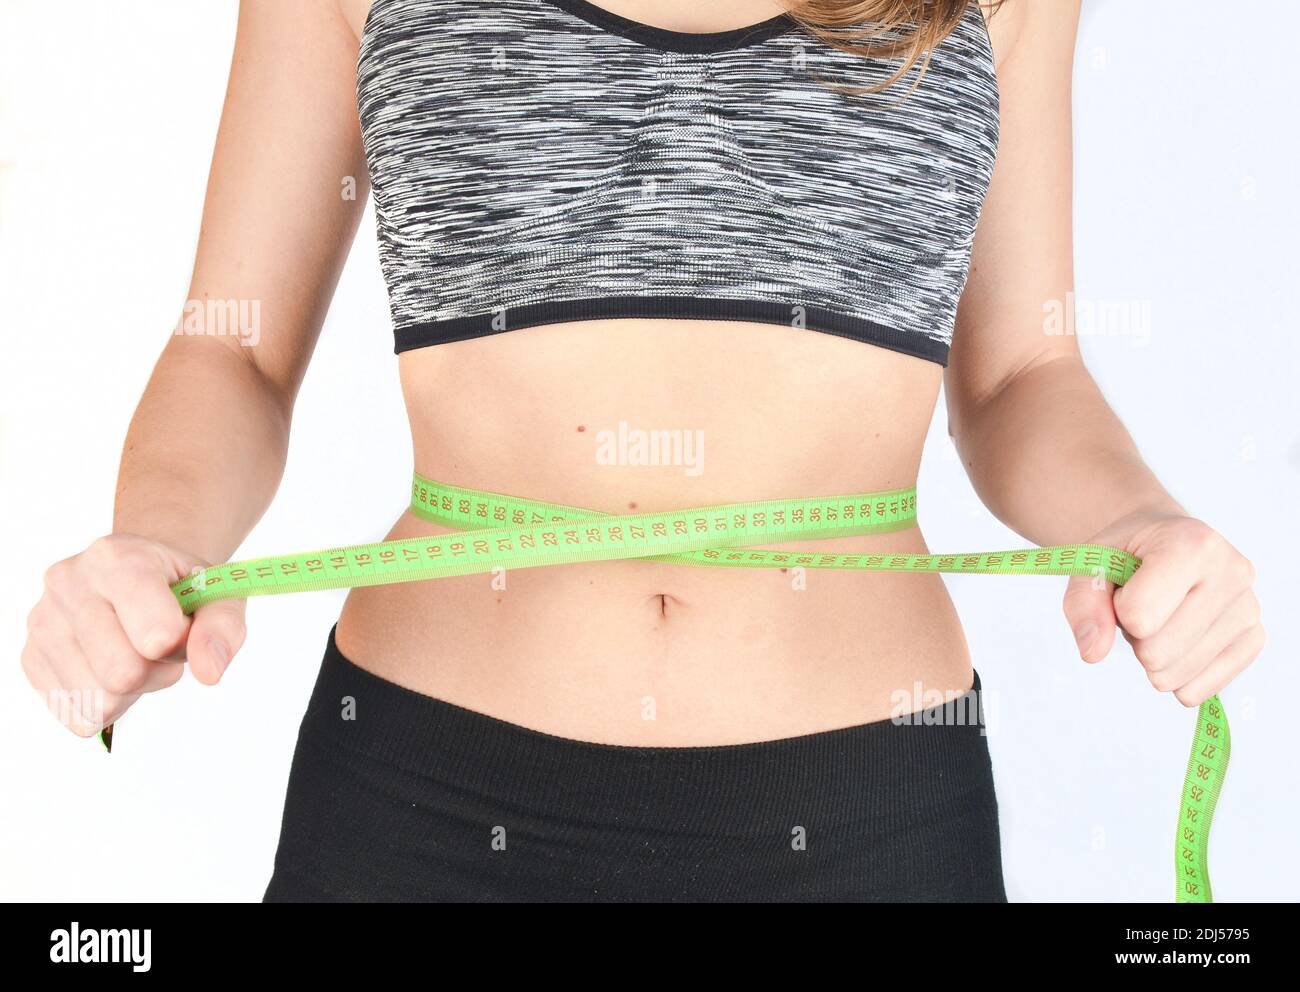 Measuring Bust, Waist, Hips. Beautiful Fit Girl Wrapped with Three Measuring  Tapes in Inch. Stock Photo - Image of slim, bust: 34747086